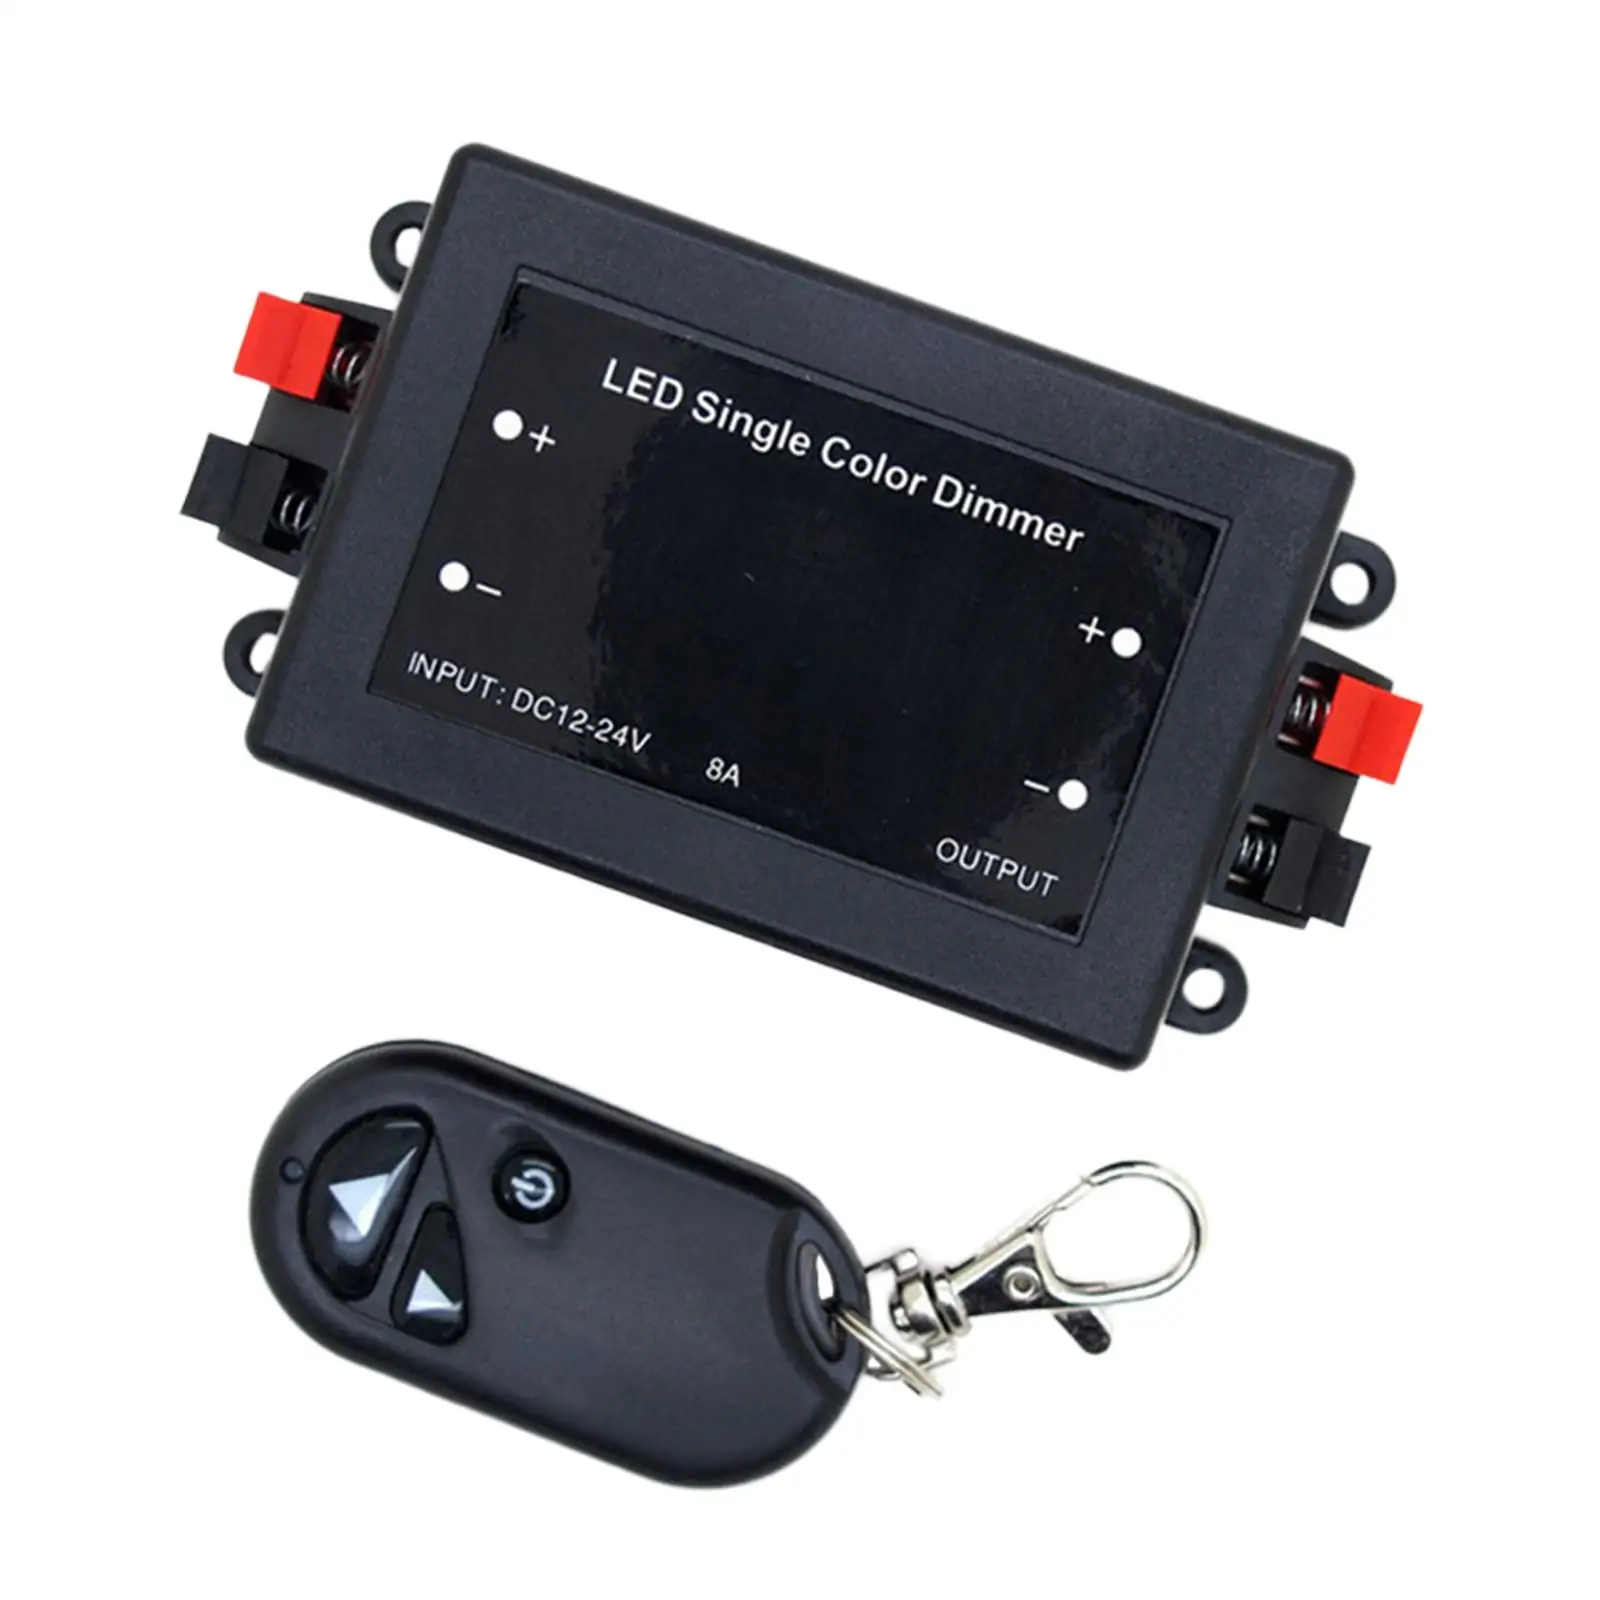 LED Single Color Dimmer Cotroller 8A 3 Key Remote Remote Control Switch for Car